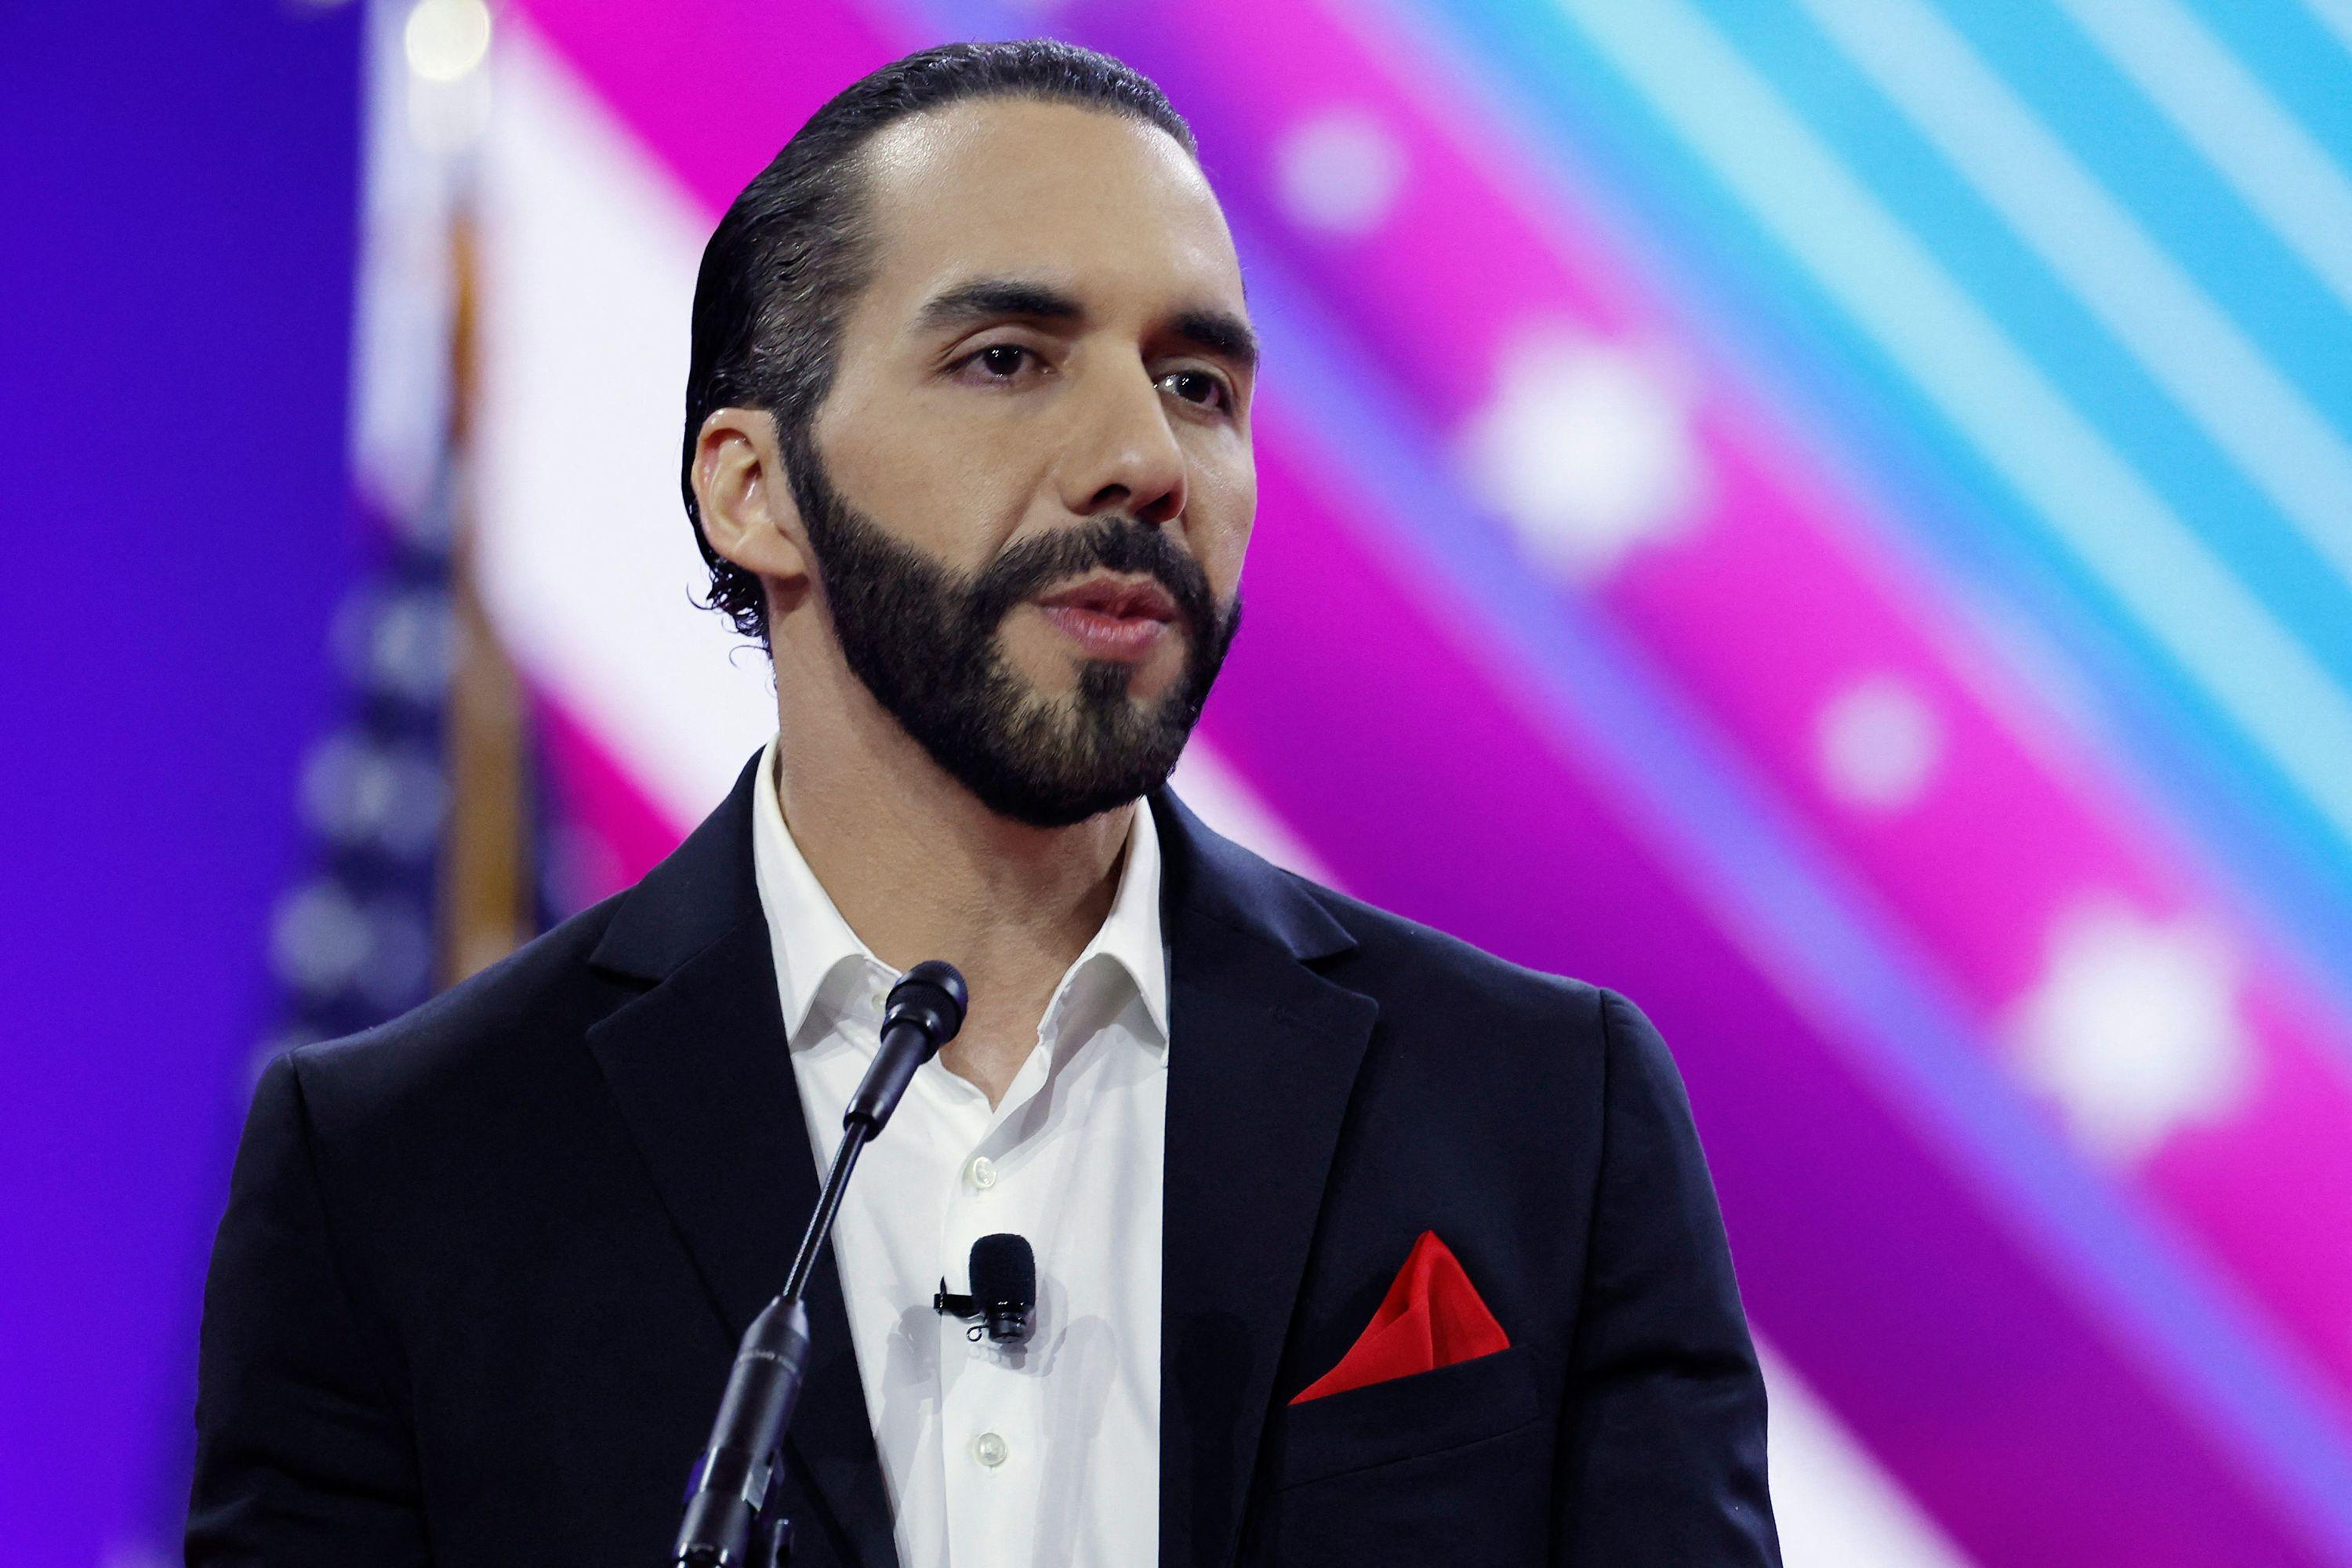 El Salvador will set aside more than $400 million in bitcoins, announces its president